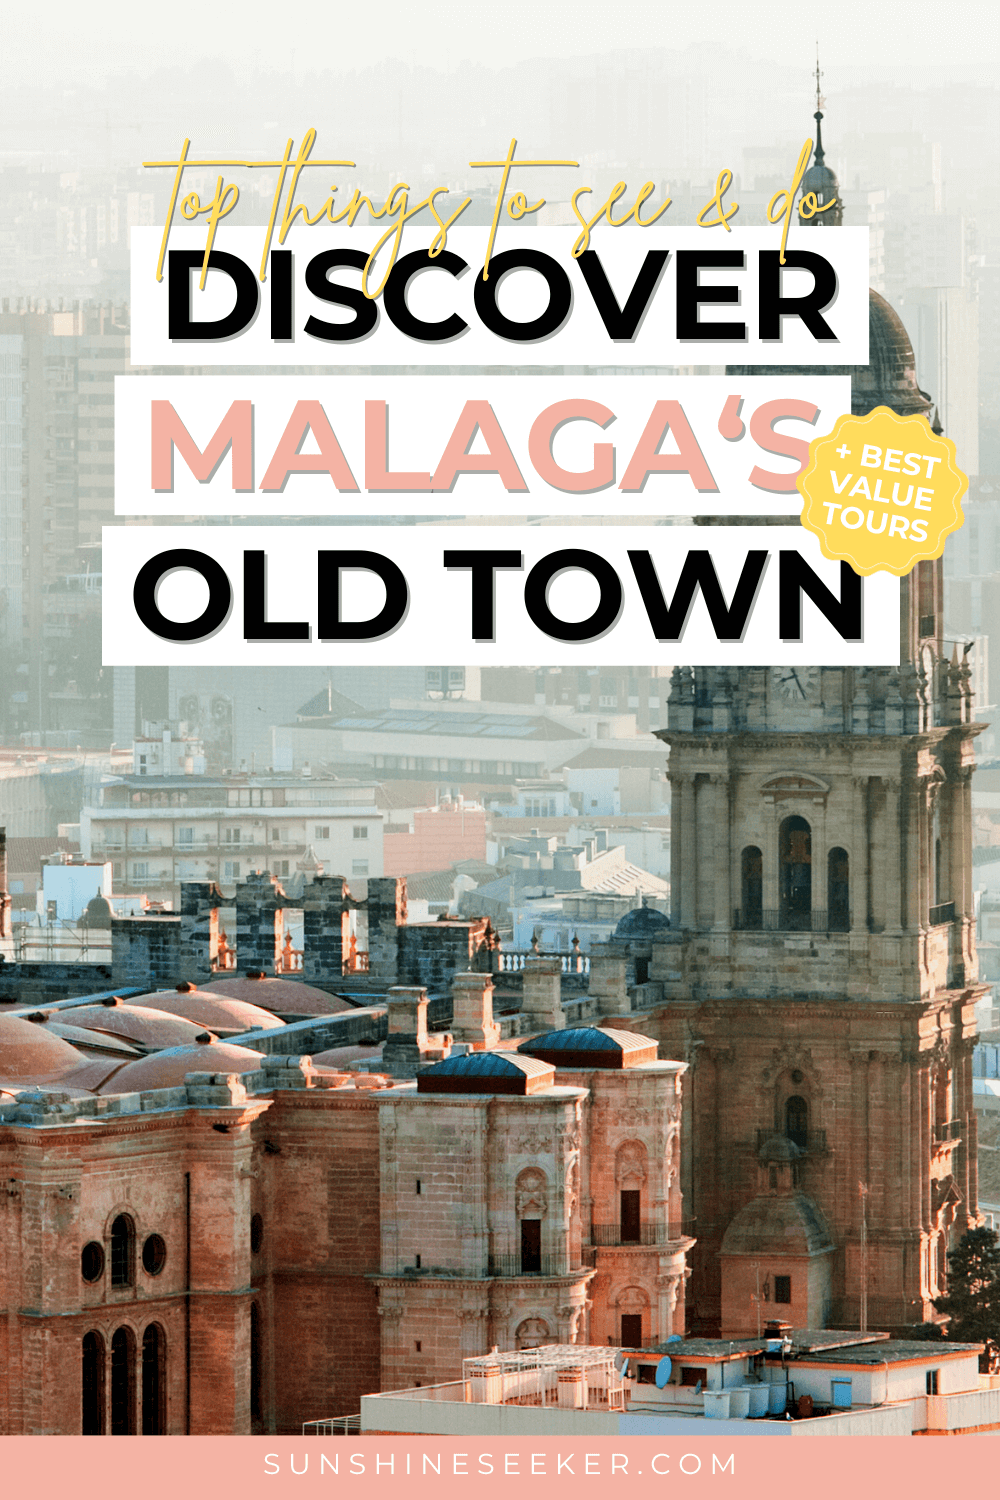 A complete guide to Malaga Old Town. Top things to see and do, best restaurants and my favorite guided tours you can't miss in Malaga, Spain!